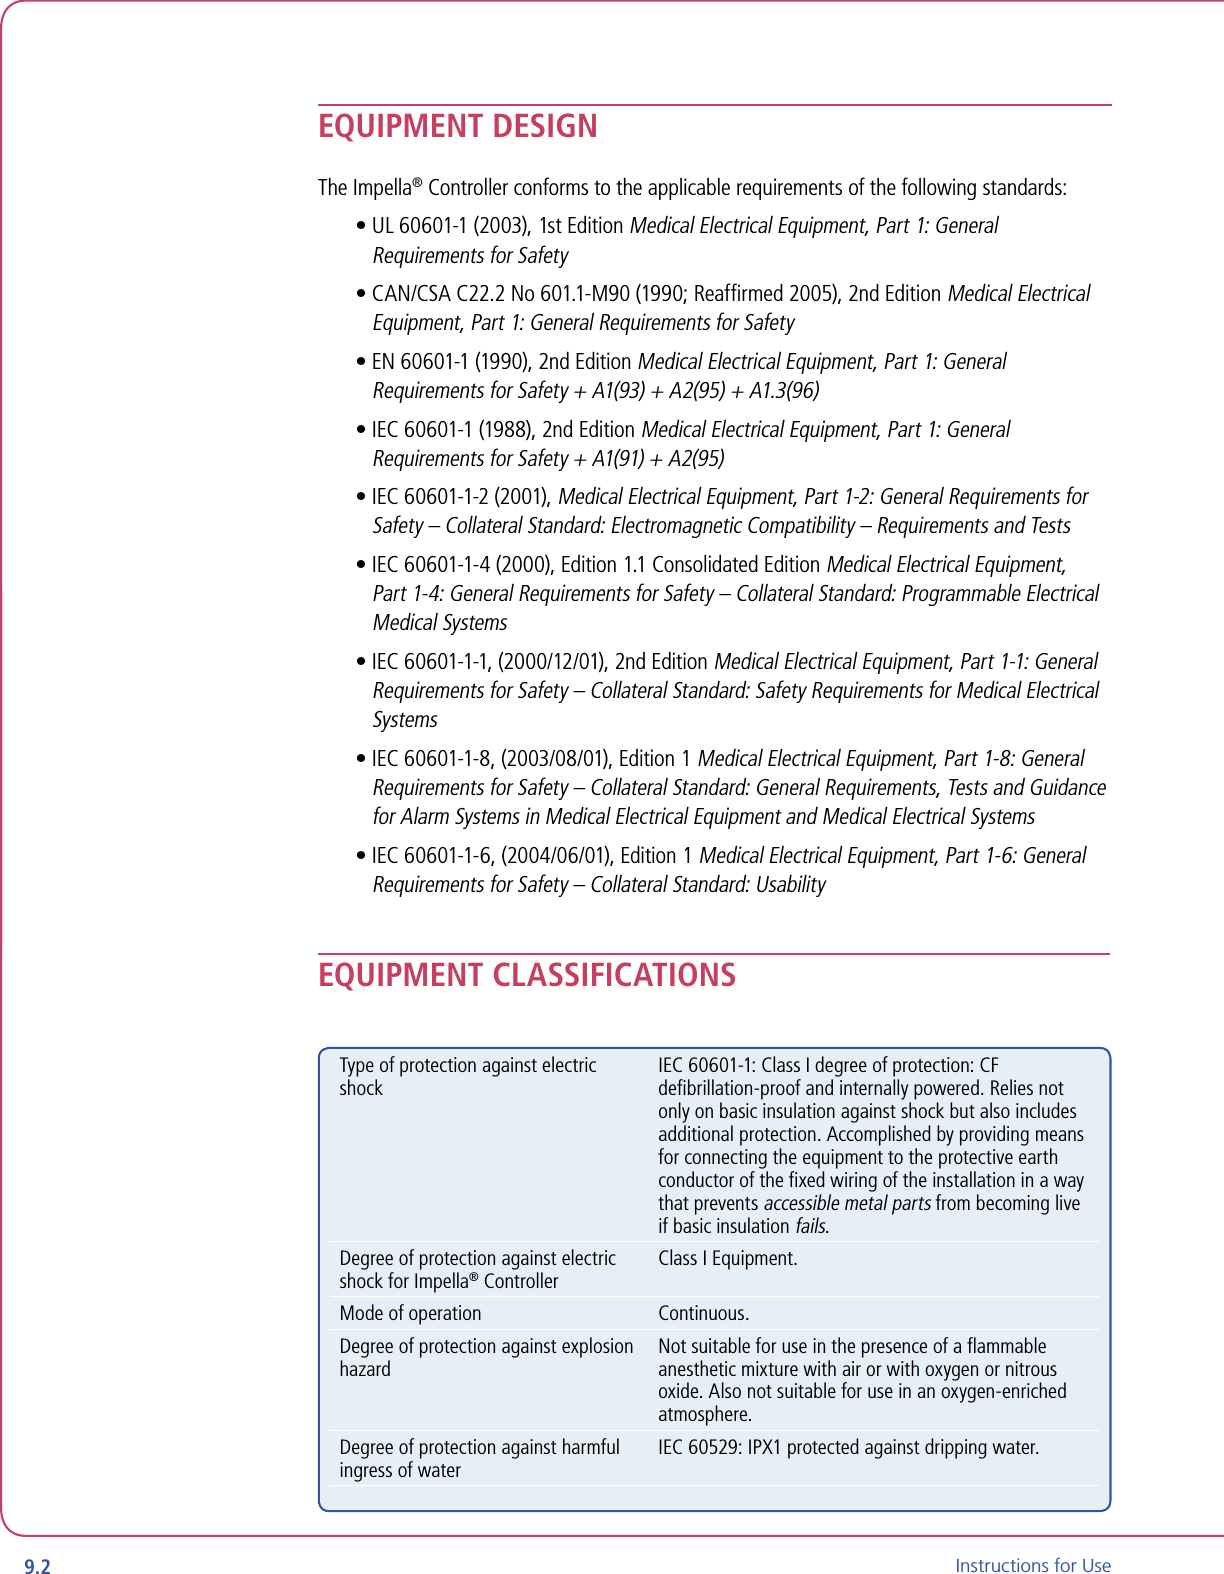 9.2 Instructions for UseEQUIPMENT DESIGNThe Impella® Controller conforms to the applicable requirements of the following standards:•  UL 60601-1 (2003), 1st Edition Medical Electrical Equipment, Part 1: General Requirements for Safety•  CAN/CSA C22.2 No 601.1-M90 (1990; Reafrmed 2005), 2nd Edition Medical Electrical Equipment, Part 1: General Requirements for Safety•  EN 60601-1 (1990), 2nd Edition Medical Electrical Equipment, Part 1: General Requirements for Safety + A1(93) + A2(95) + A1.3(96)•  IEC 60601-1 (1988), 2nd Edition Medical Electrical Equipment, Part 1: General Requirements for Safety + A1(91) + A2(95)•  IEC 60601-1-2 (2001), Medical Electrical Equipment, Part 1-2: General Requirements for Safety – Collateral Standard: Electromagnetic Compatibility – Requirements and Tests•  IEC 60601-1-4 (2000), Edition 1.1 Consolidated Edition Medical Electrical Equipment, Part 1-4: General Requirements for Safety – Collateral Standard: Programmable Electrical Medical Systems•  IEC 60601-1-1, (2000/12/01), 2nd Edition Medical Electrical Equipment, Part 1-1: General Requirements for Safety – Collateral Standard: Safety Requirements for Medical Electrical Systems•  IEC 60601-1-8, (2003/08/01), Edition 1 Medical Electrical Equipment, Part 1-8: General Requirements for Safety – Collateral Standard: General Requirements, Tests and Guidance for Alarm Systems in Medical Electrical Equipment and Medical Electrical Systems•  IEC 60601-1-6, (2004/06/01), Edition 1 Medical Electrical Equipment, Part 1-6: General Requirements for Safety – Collateral Standard: UsabilityEQUIPMENT CLASSIFICATIONSType of protection against electric shockIEC 60601-1: Class I degree of protection: CF deﬁbrillation-proof and internally powered. Relies not only on basic insulation against shock but also includes additional protection. Accomplished by providing means for connecting the equipment to the protective earth conductor of the ﬁxed wiring of the installation in a way that prevents accessible metal parts from becoming live if basic insulation fails.Degree of protection against electric shock for Impella® ControllerClass I Equipment.Mode of operation Continuous.Degree of protection against explosion hazardNot suitable for use in the presence of a ﬂammable anesthetic mixture with air or with oxygen or nitrous oxide. Also not suitable for use in an oxygen-enriched atmosphere.Degree of protection against harmful ingress of waterIEC 60529: IPX1 protected against dripping water.